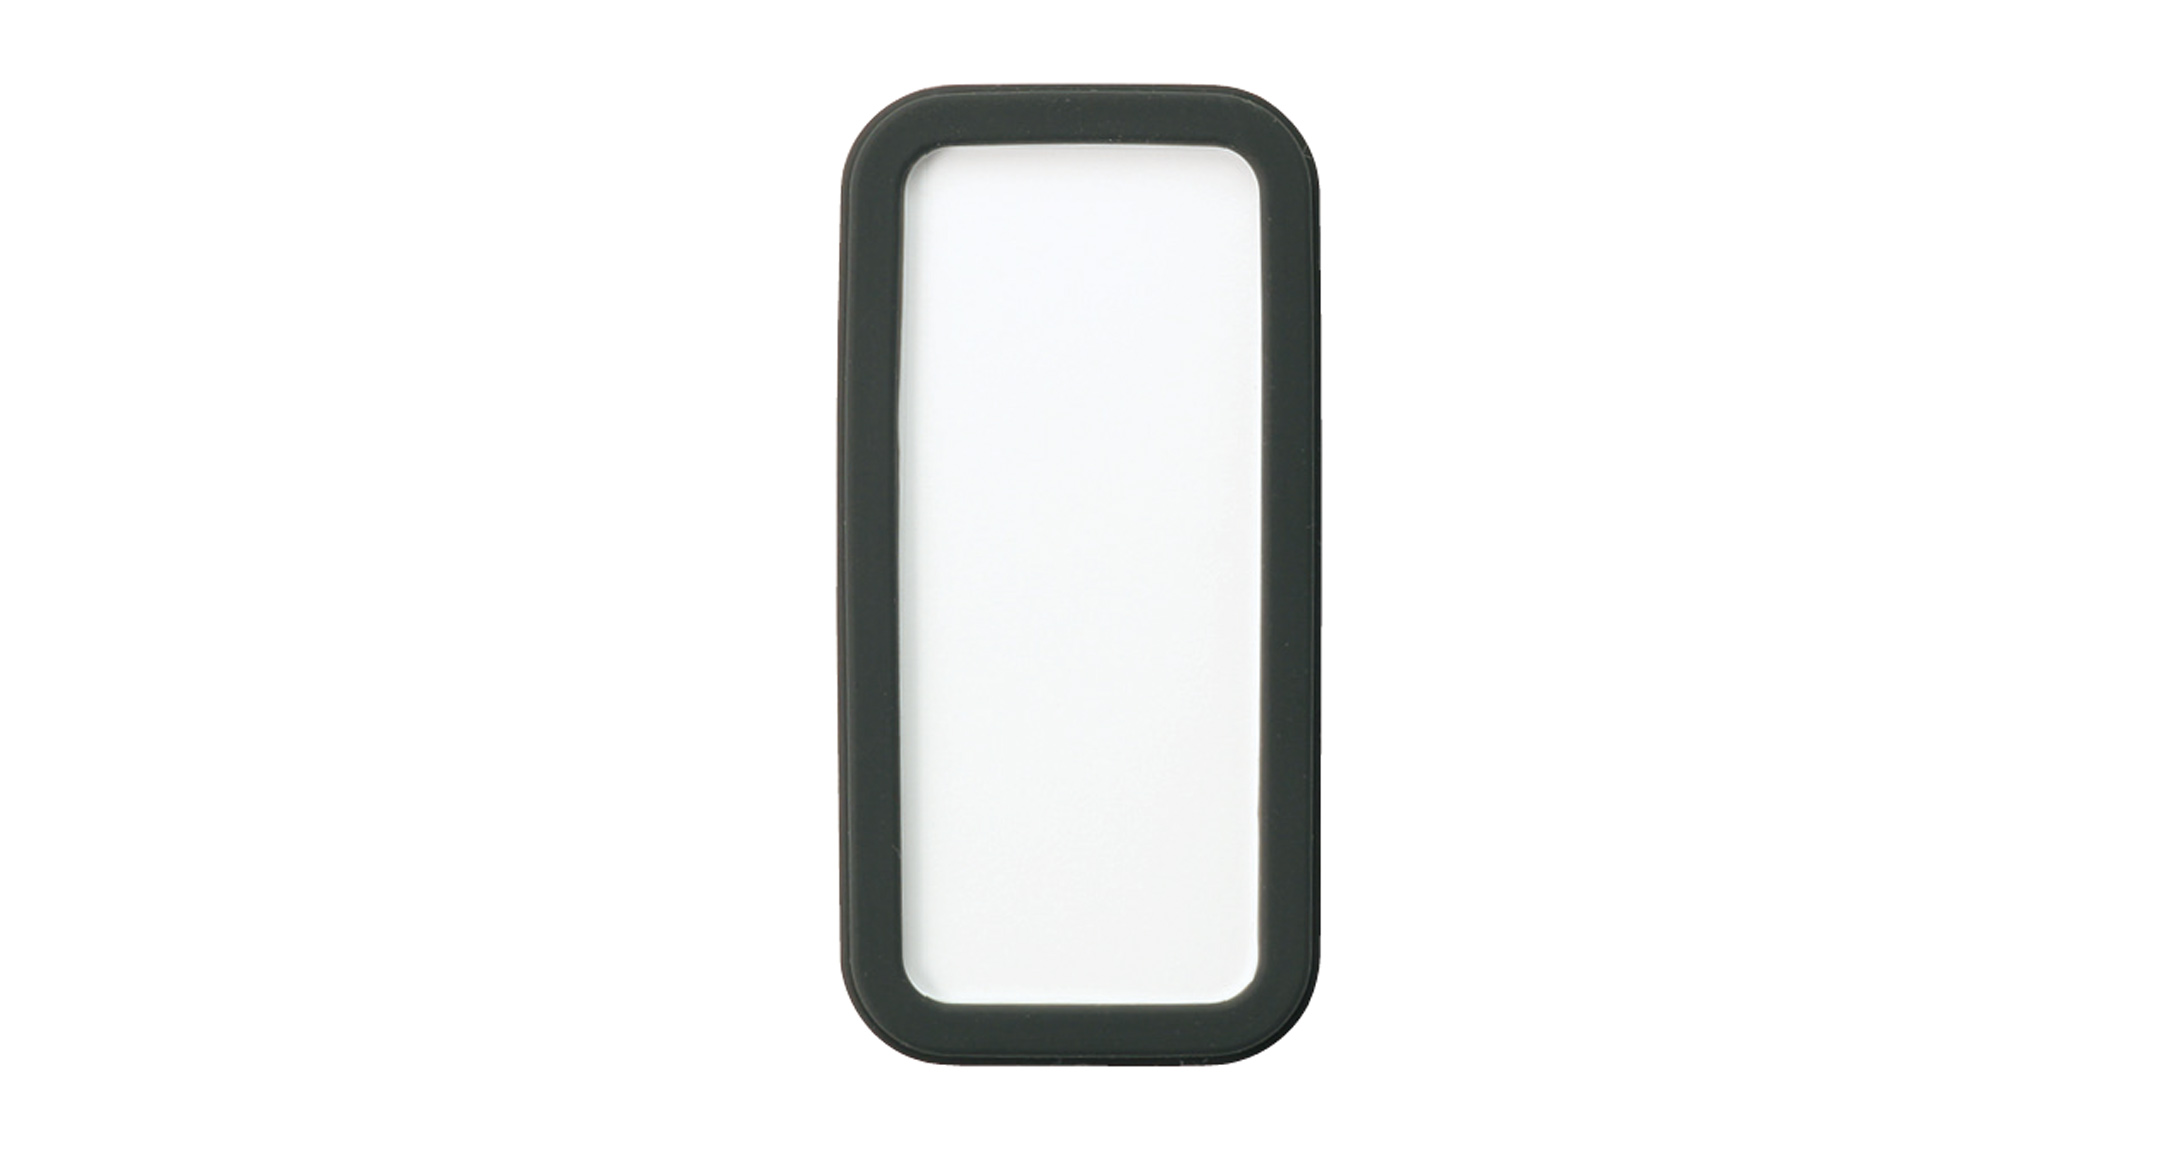 PORTABLE PLASTIC CASE with SILICONE COVER - CSS series:White/Black(Similar to PANTONE ProcessBlack C)